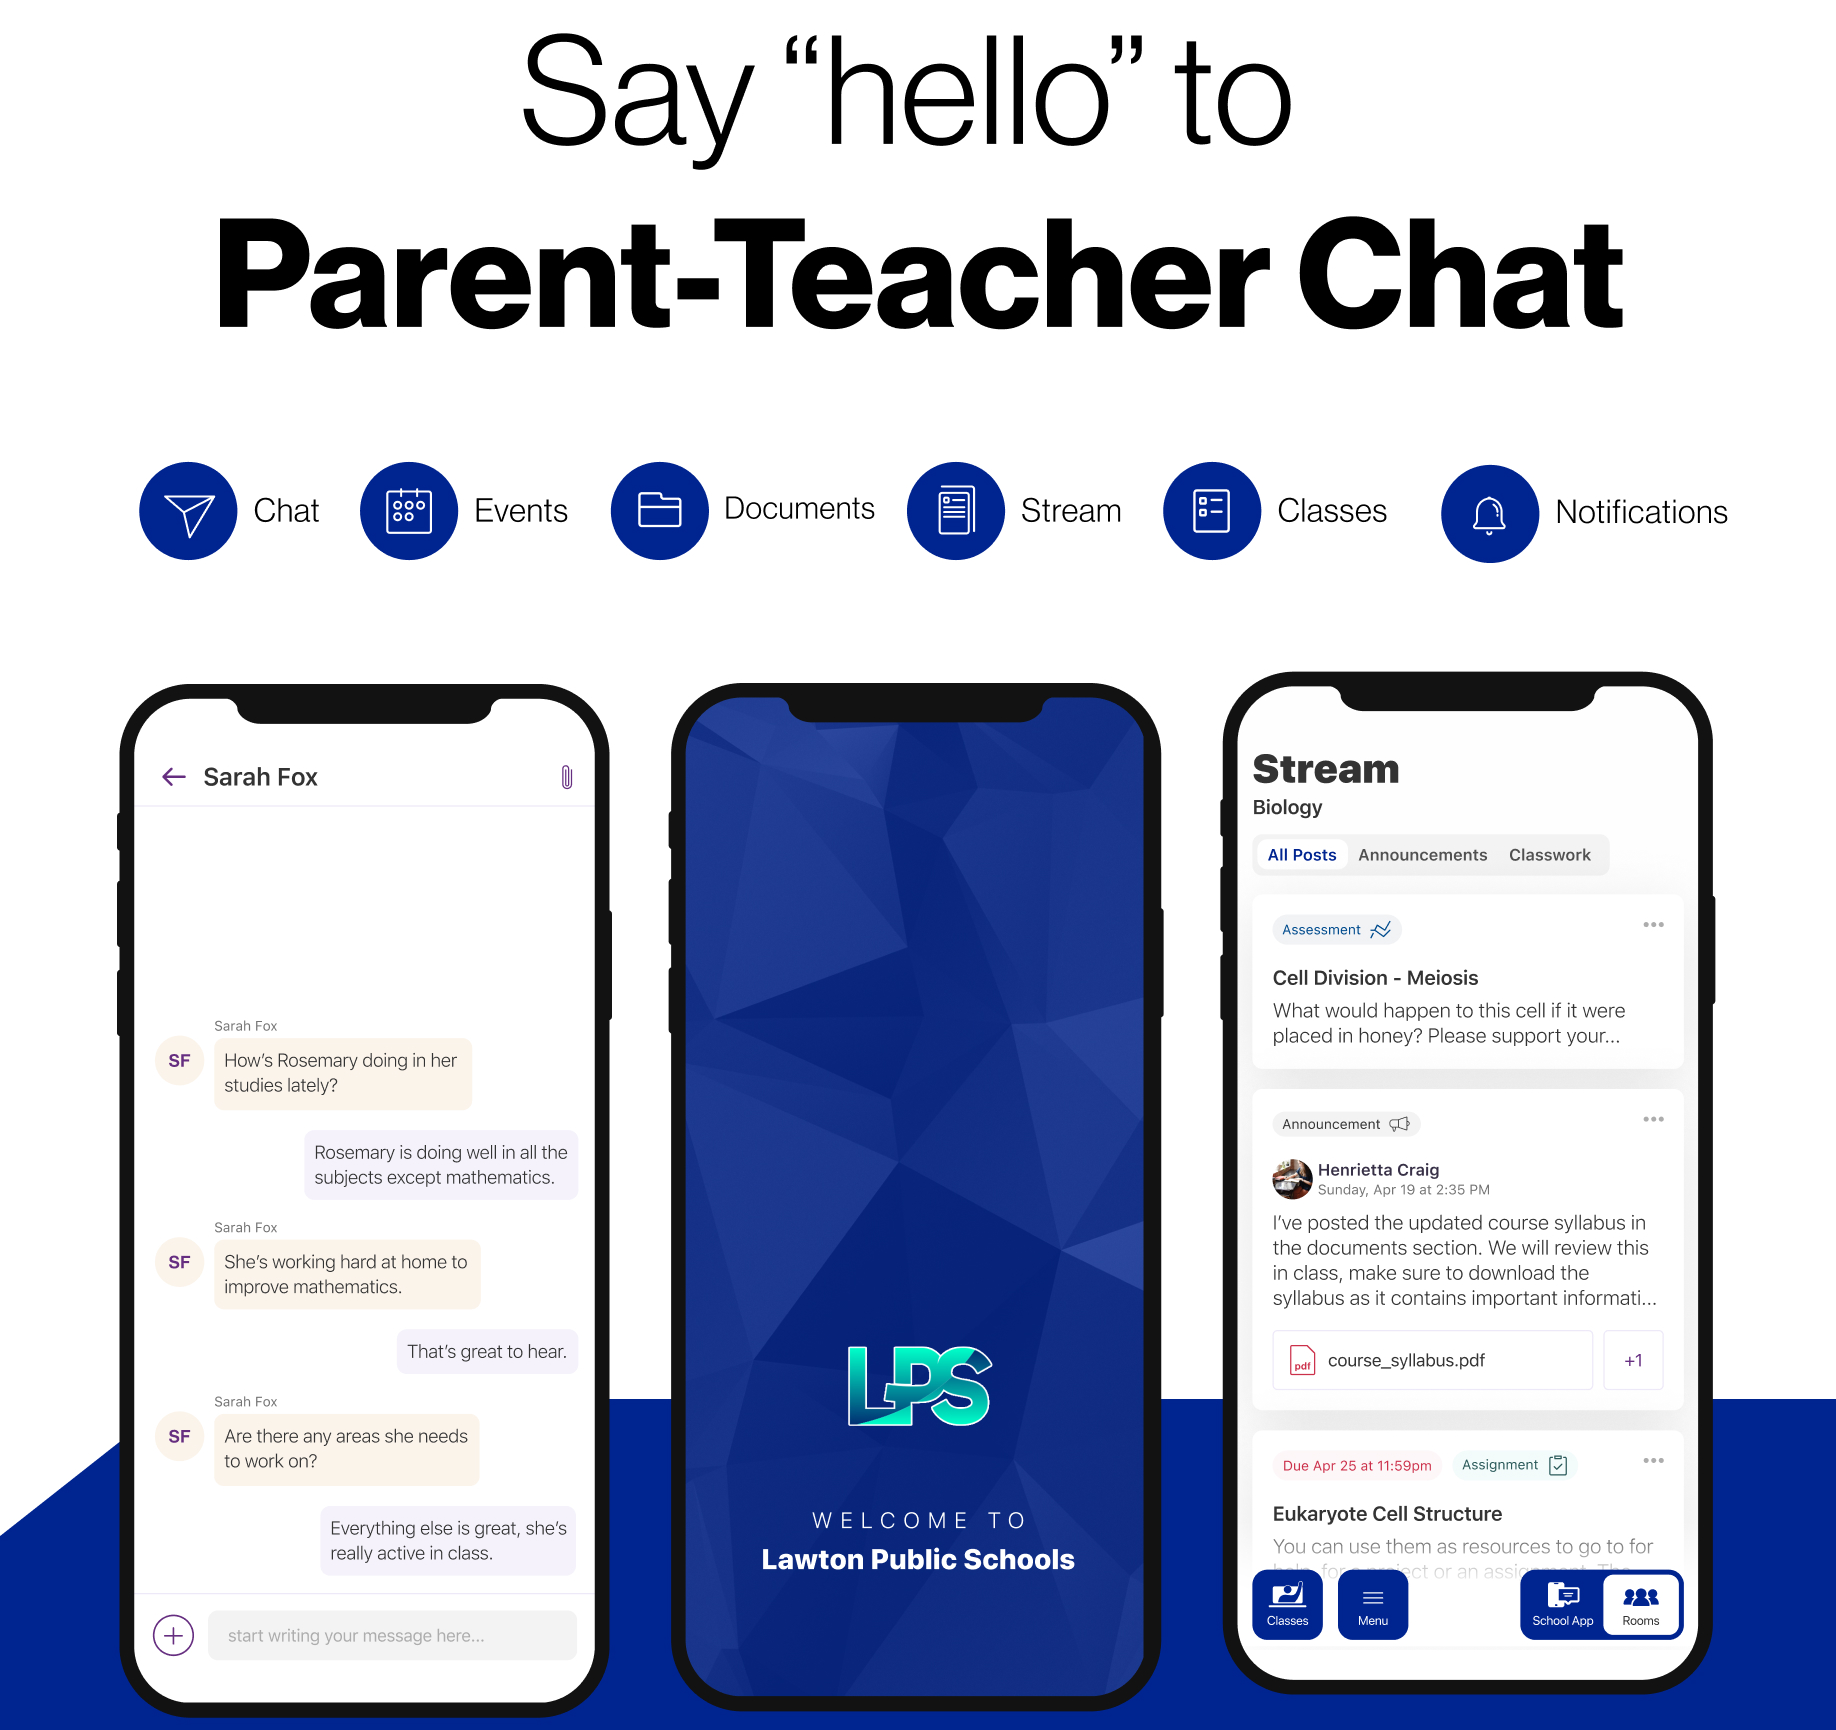 Say hello to parent-teacher chat in the LPS app!